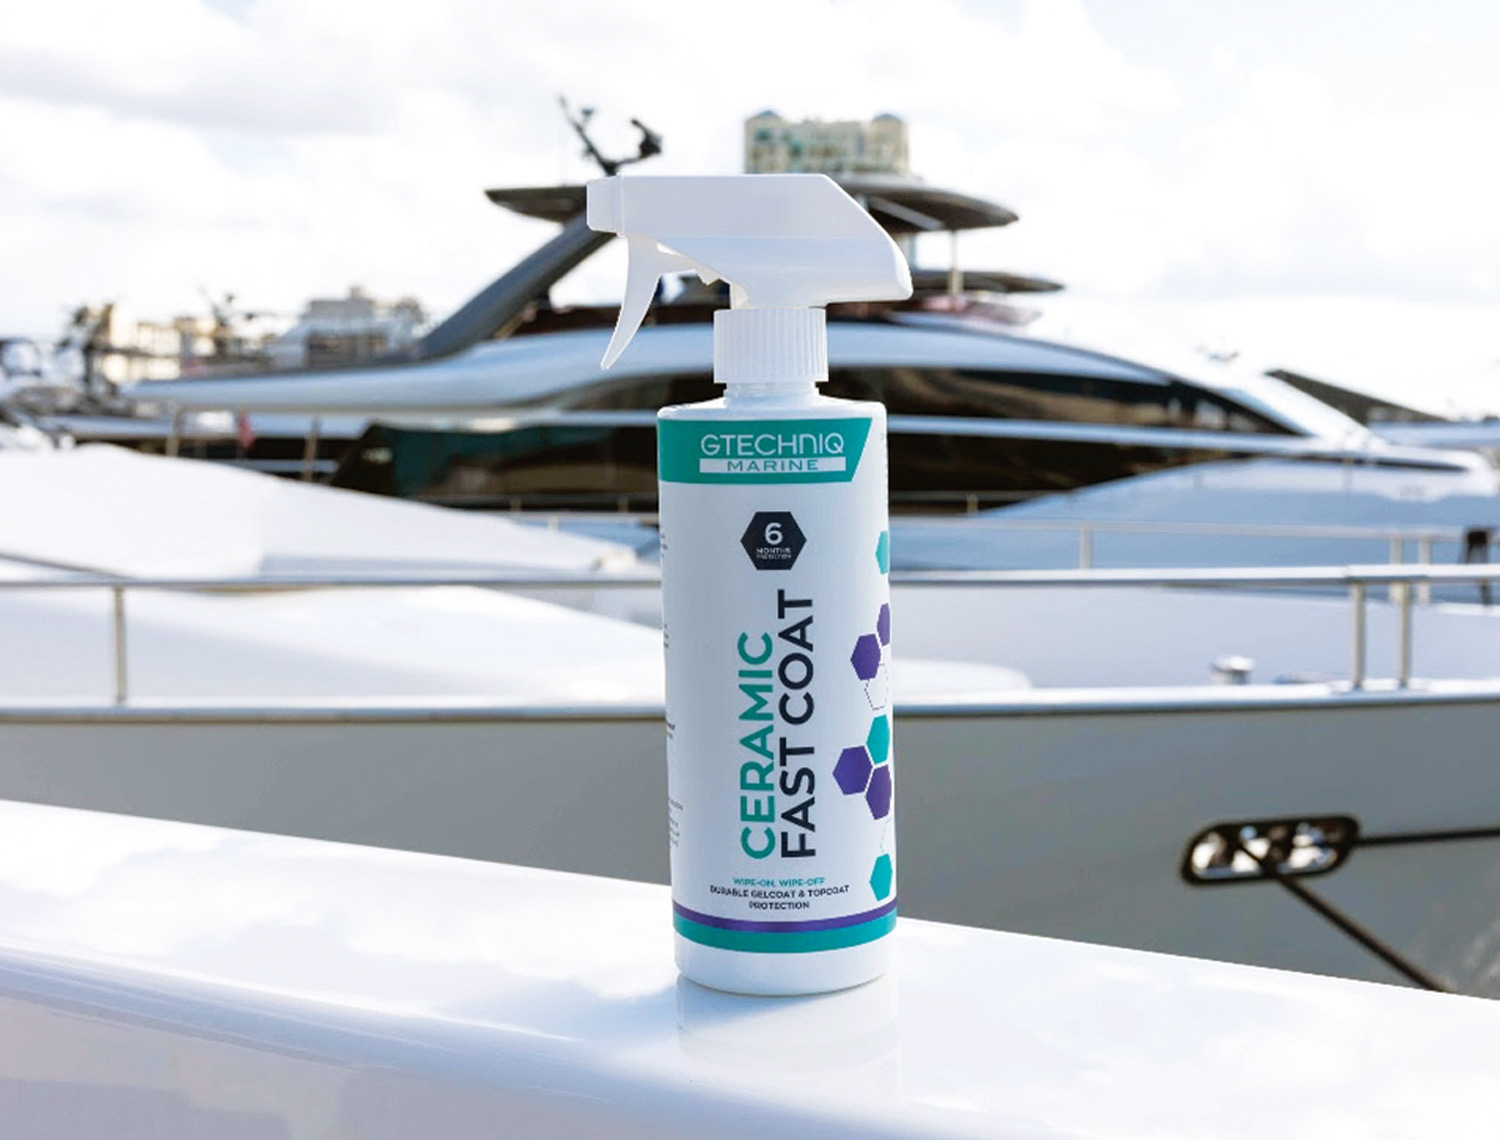 Gtechniq a container of Marine Ceramic Fast Coat sits on the deck of a boat with another boat in the background